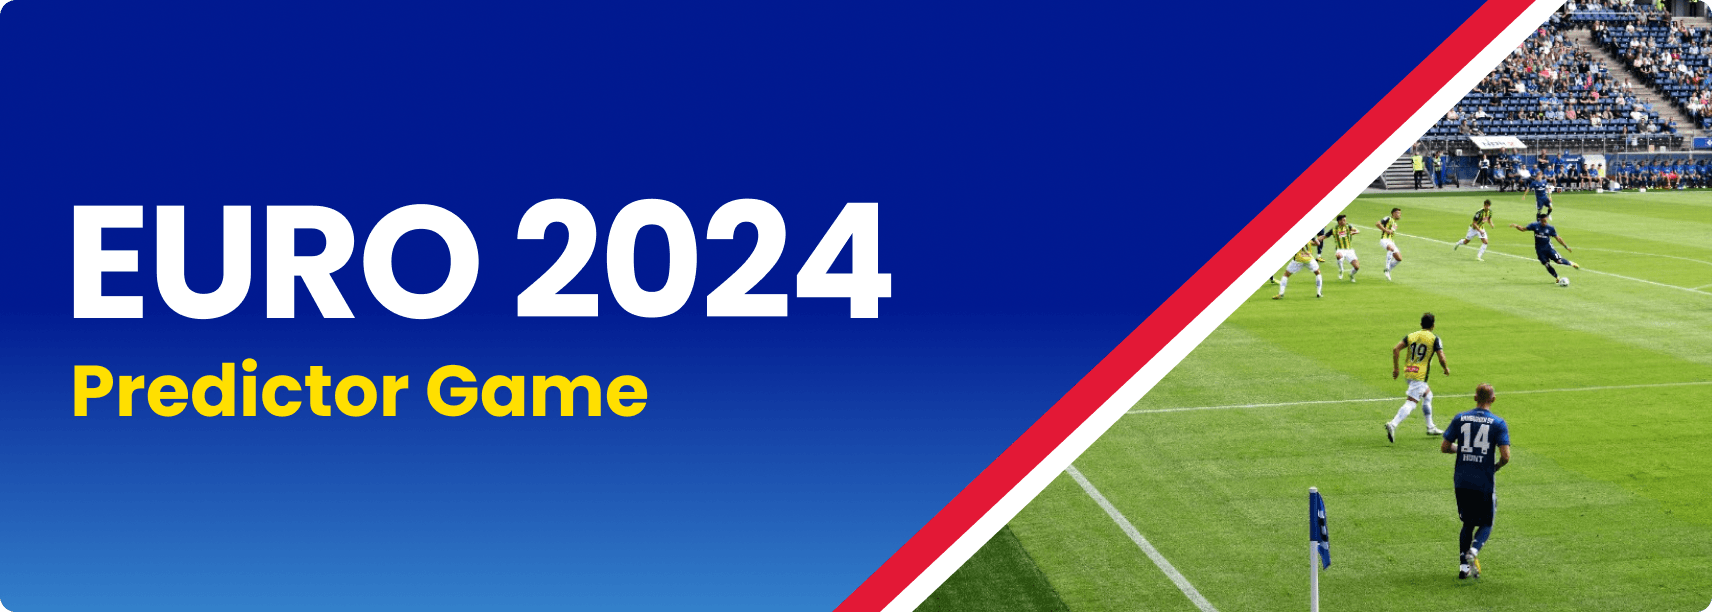 Euro 2024 Predictor Game Betfred